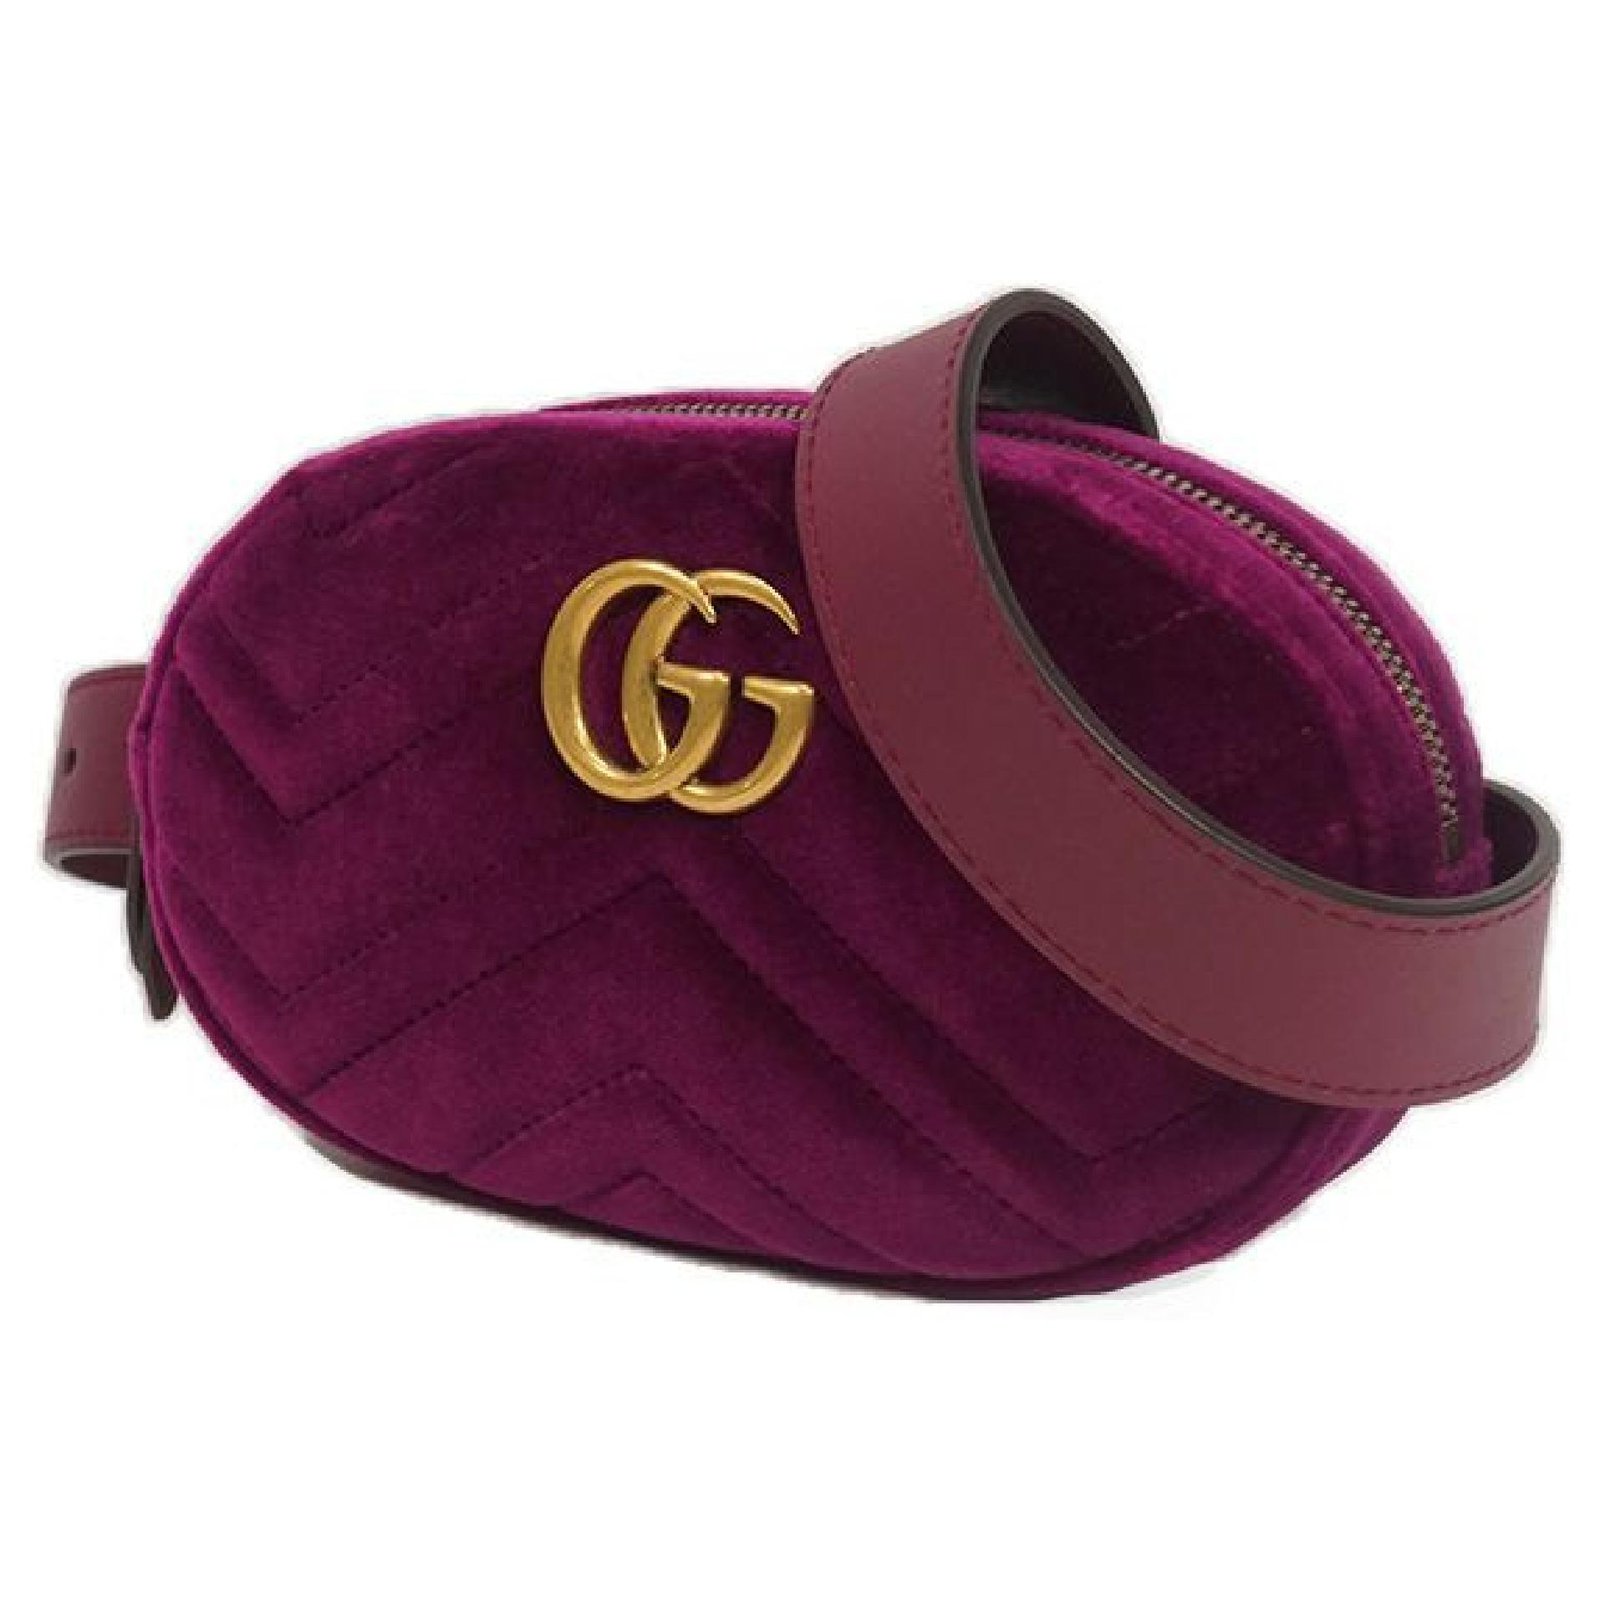 GUCCI GG MARMONT HEART SHAPED COIN PURSE IN DEPTH REVIEW (SPECS